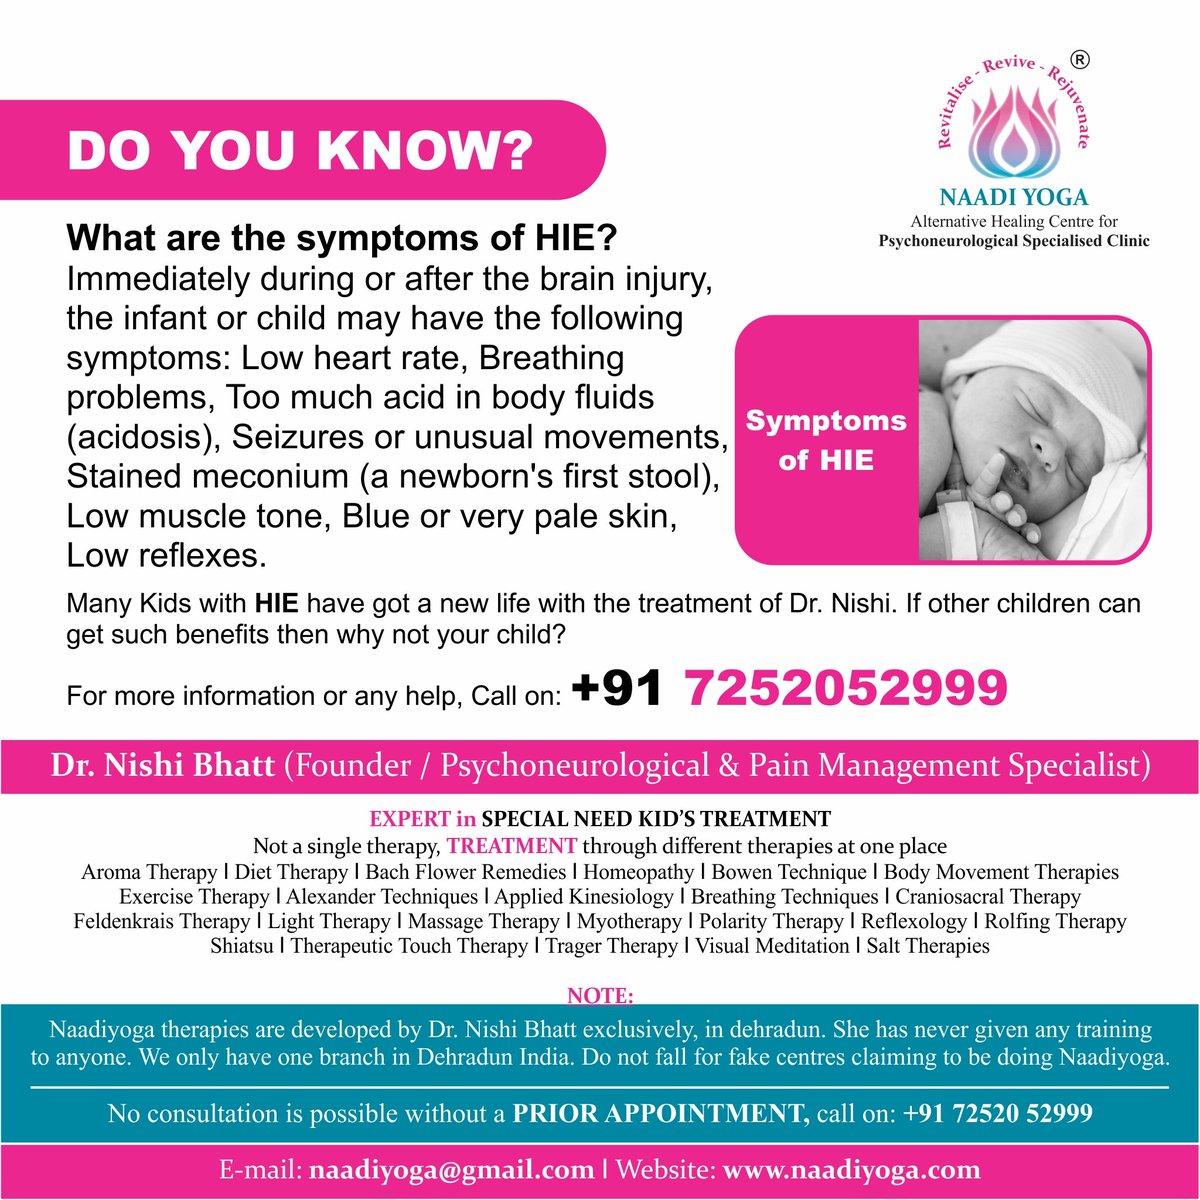 Do you know - What are the symptoms of HIE?

If your child is also suffering with HIE or any other neurological disorders then you can call on our helpline number: +91 7252052999

#epilepsy #seizure #fits #dyslexiaawareness #cerebralpalsy #autism #asd #HIE #epilepsy #seizures